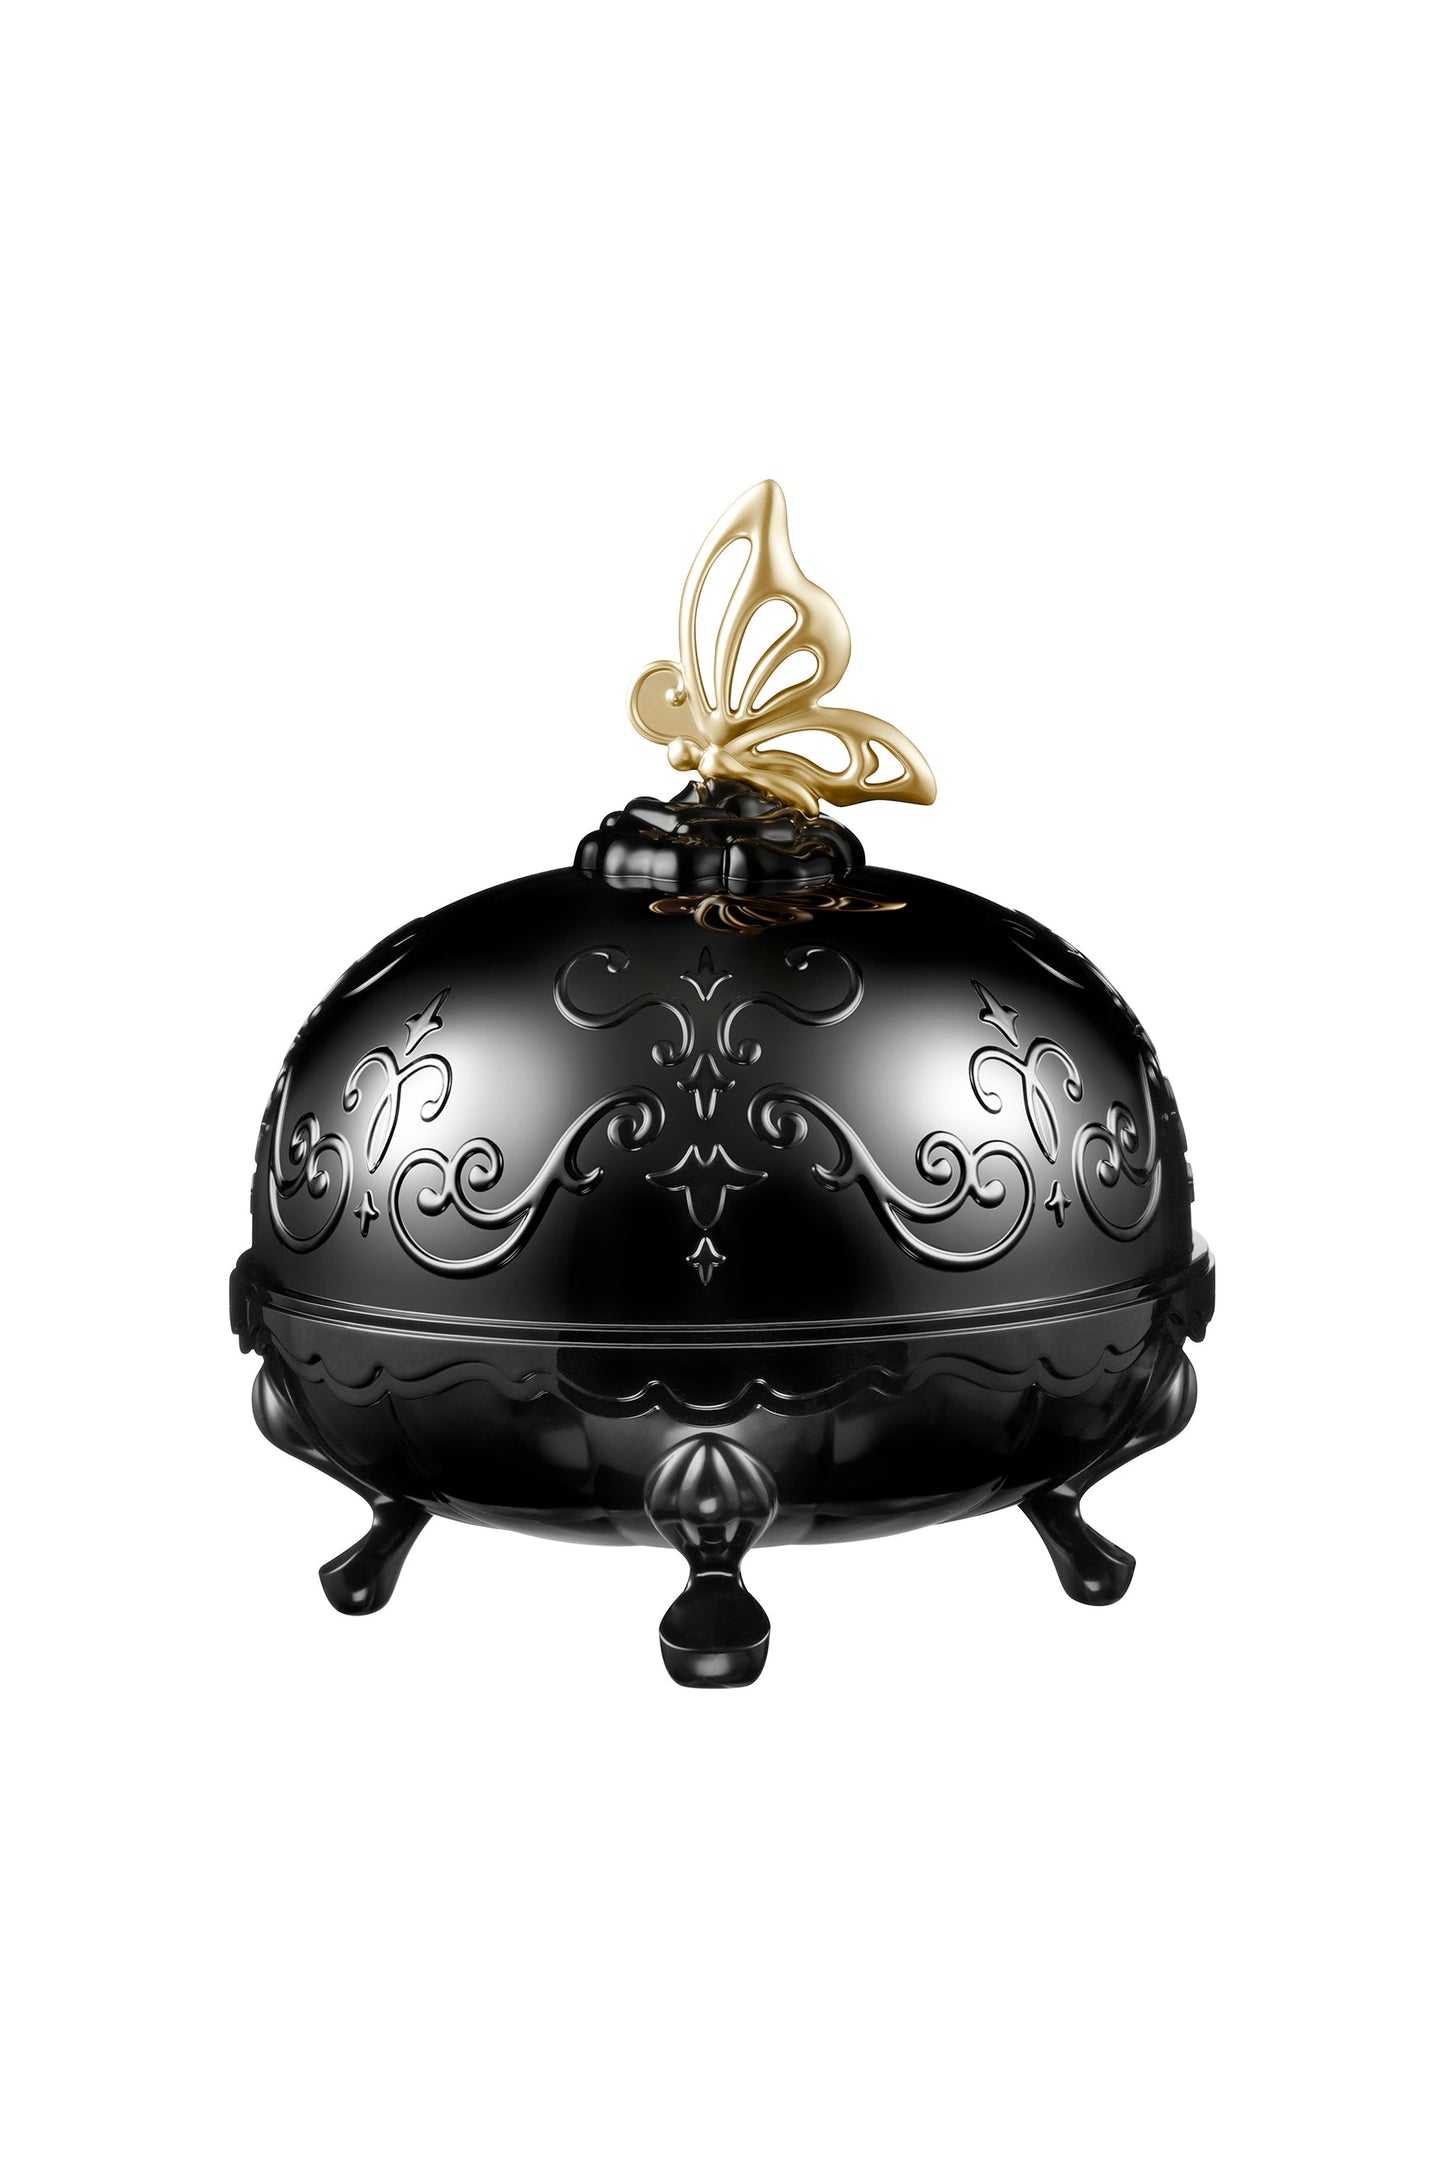 Powder case black classic Anna Sui, It includes chic cabriole legs that support a golden butterfly